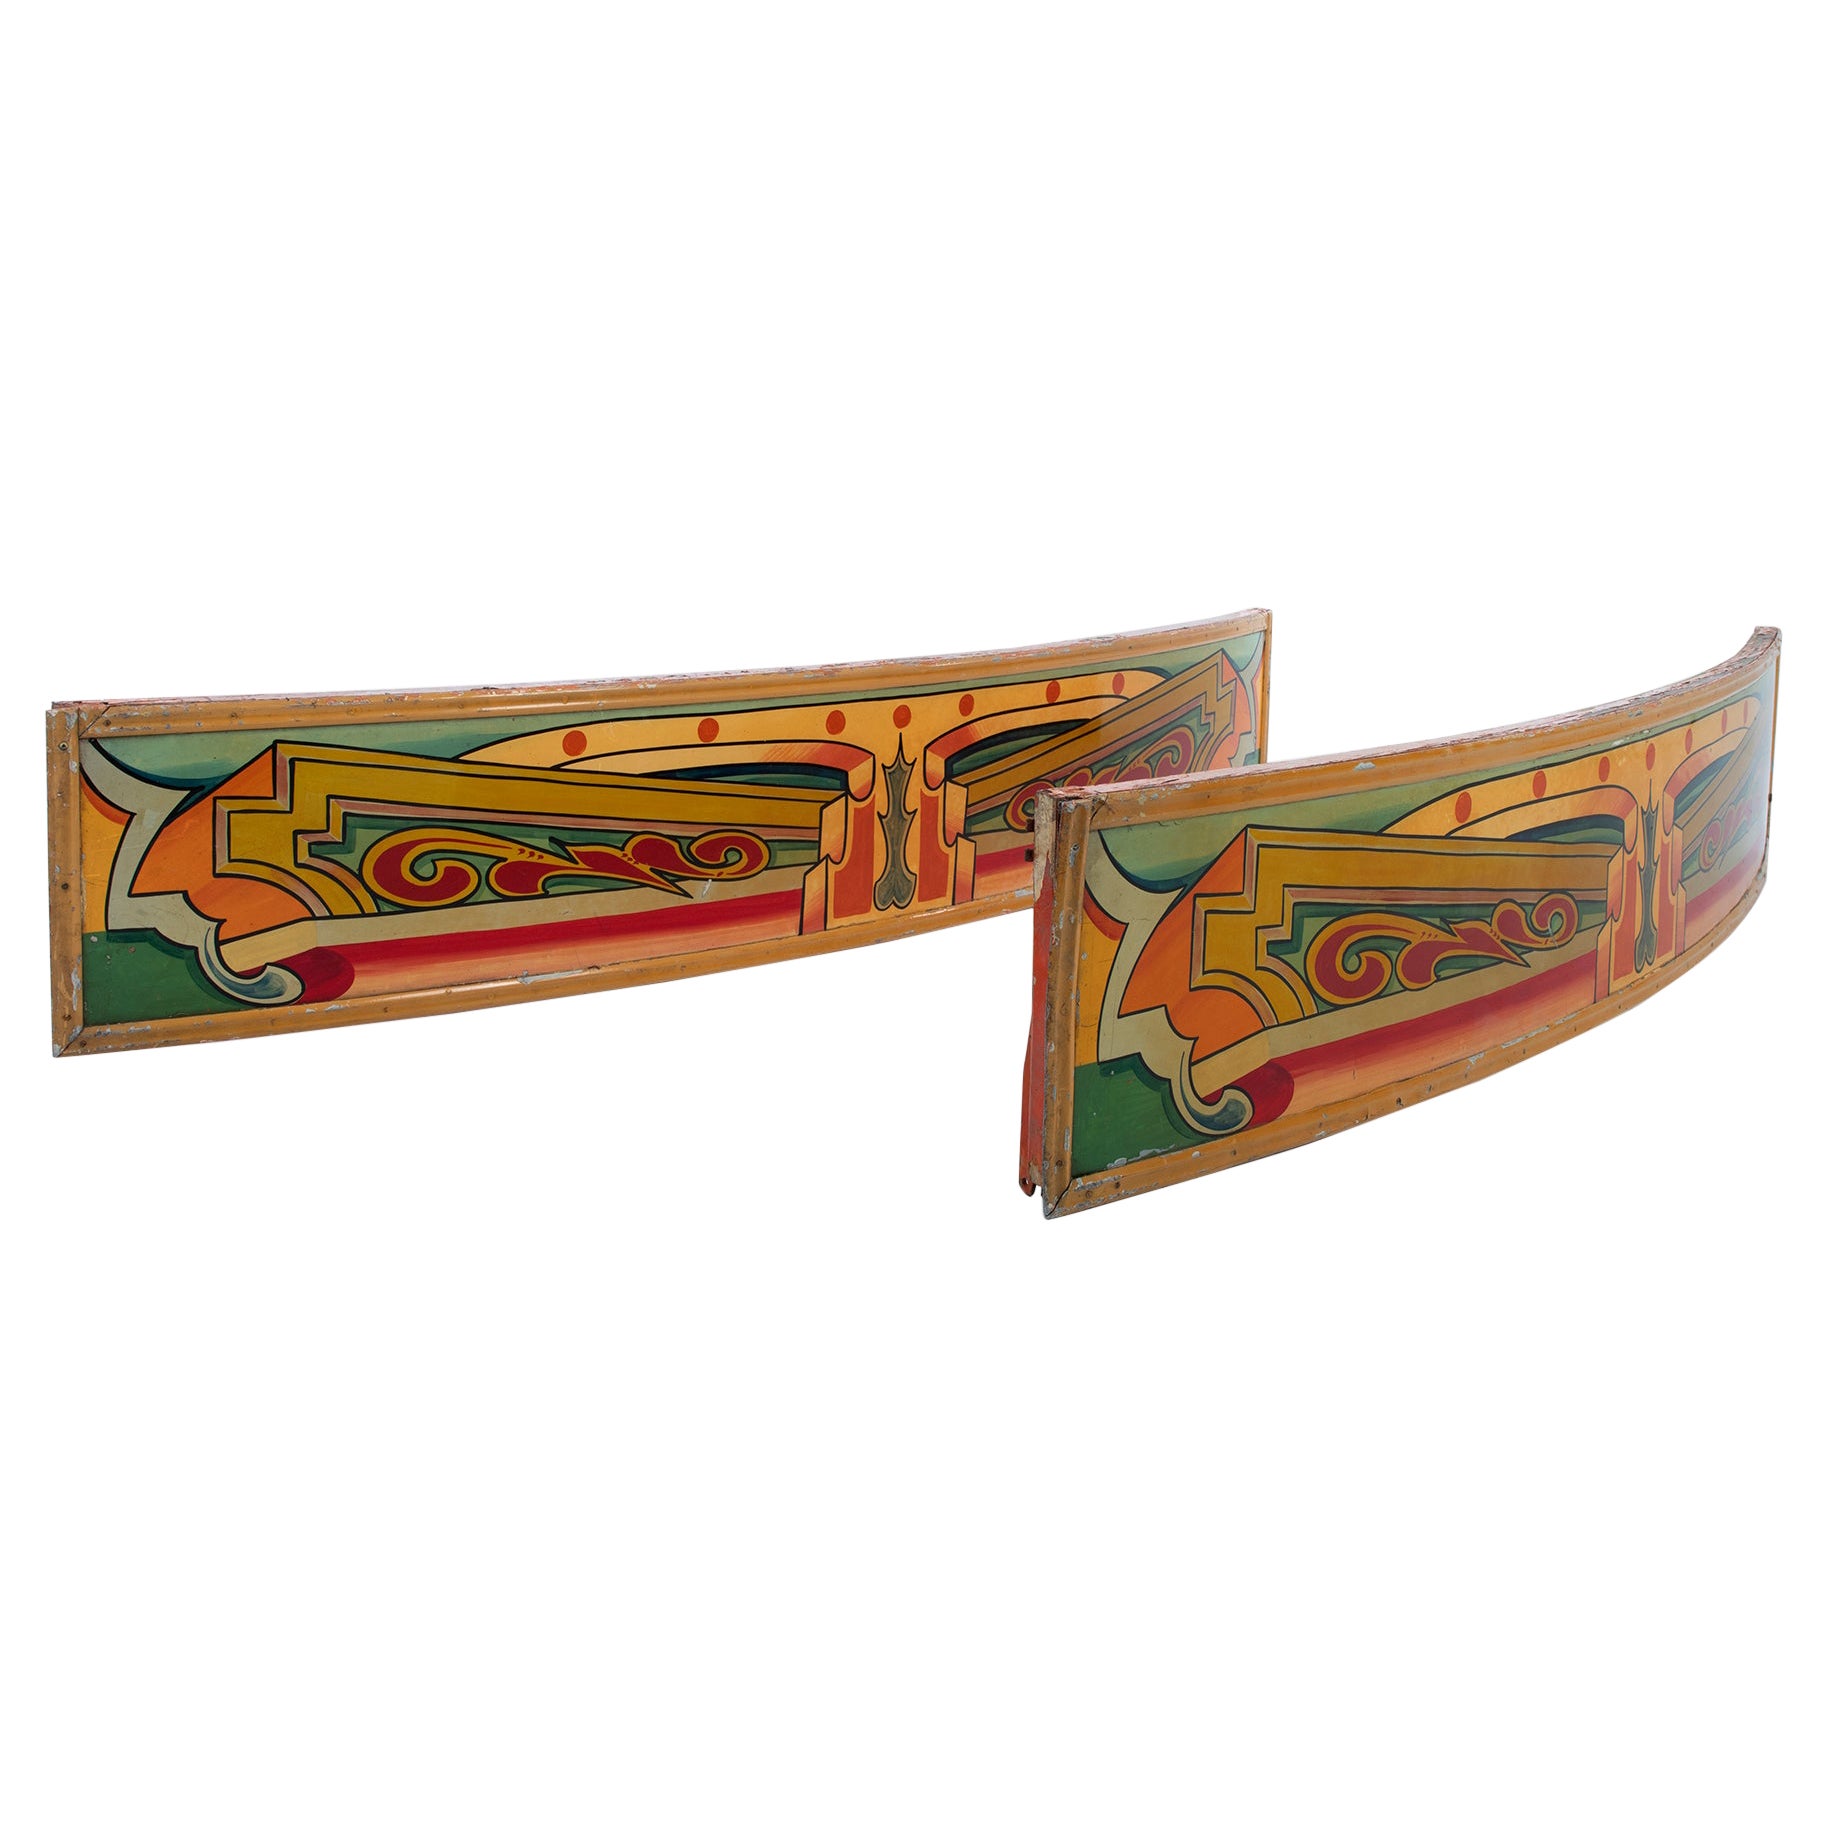 Pair of Original Hand-Painted Wooden Fairground Signage, circa 1950s For Sale